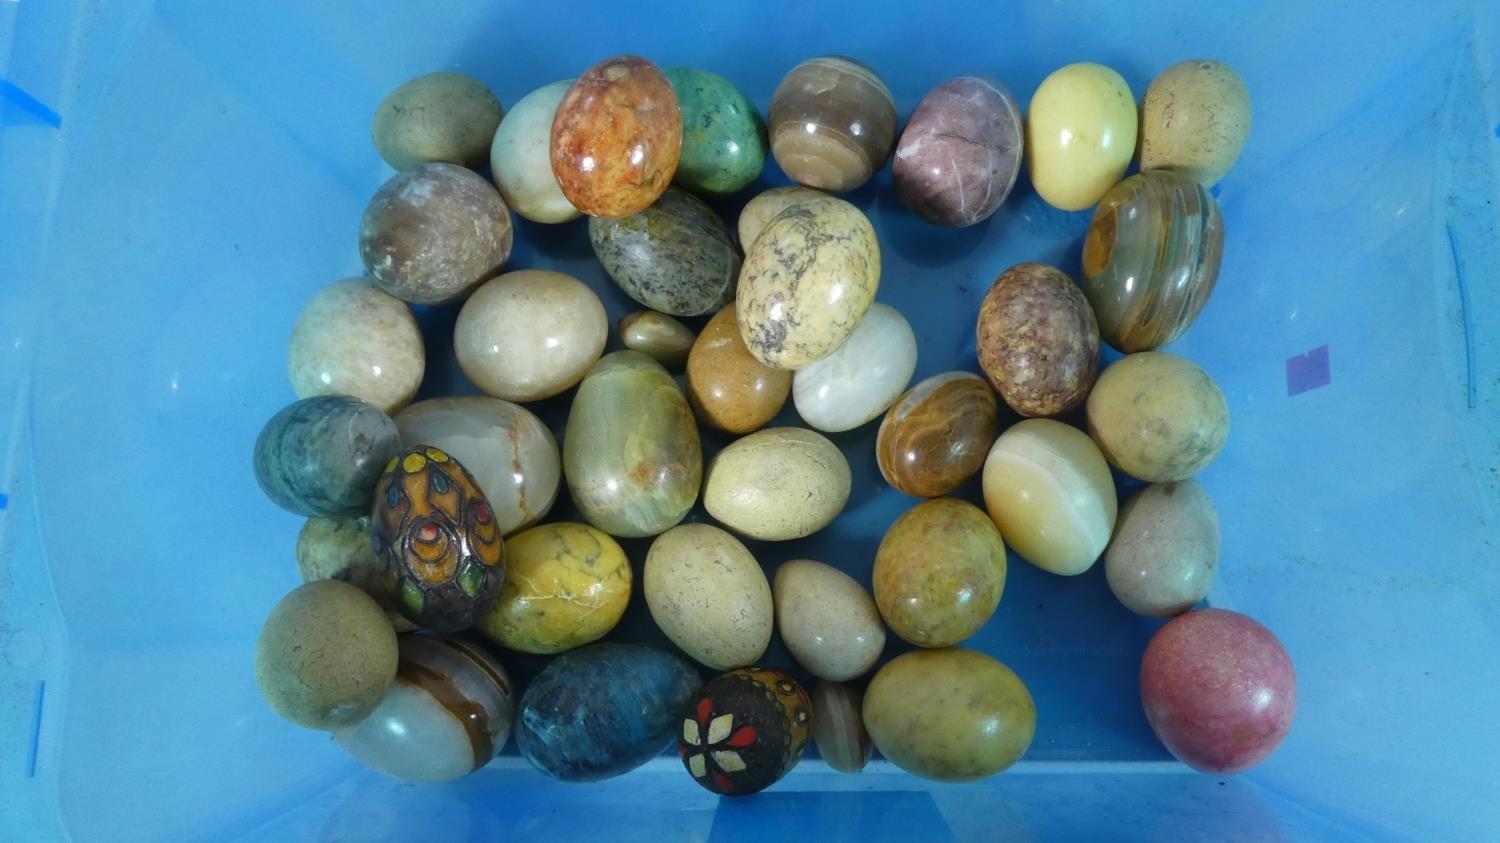 A Collection of Polished Stone and Onyx Eggs Etc. - Image 2 of 2